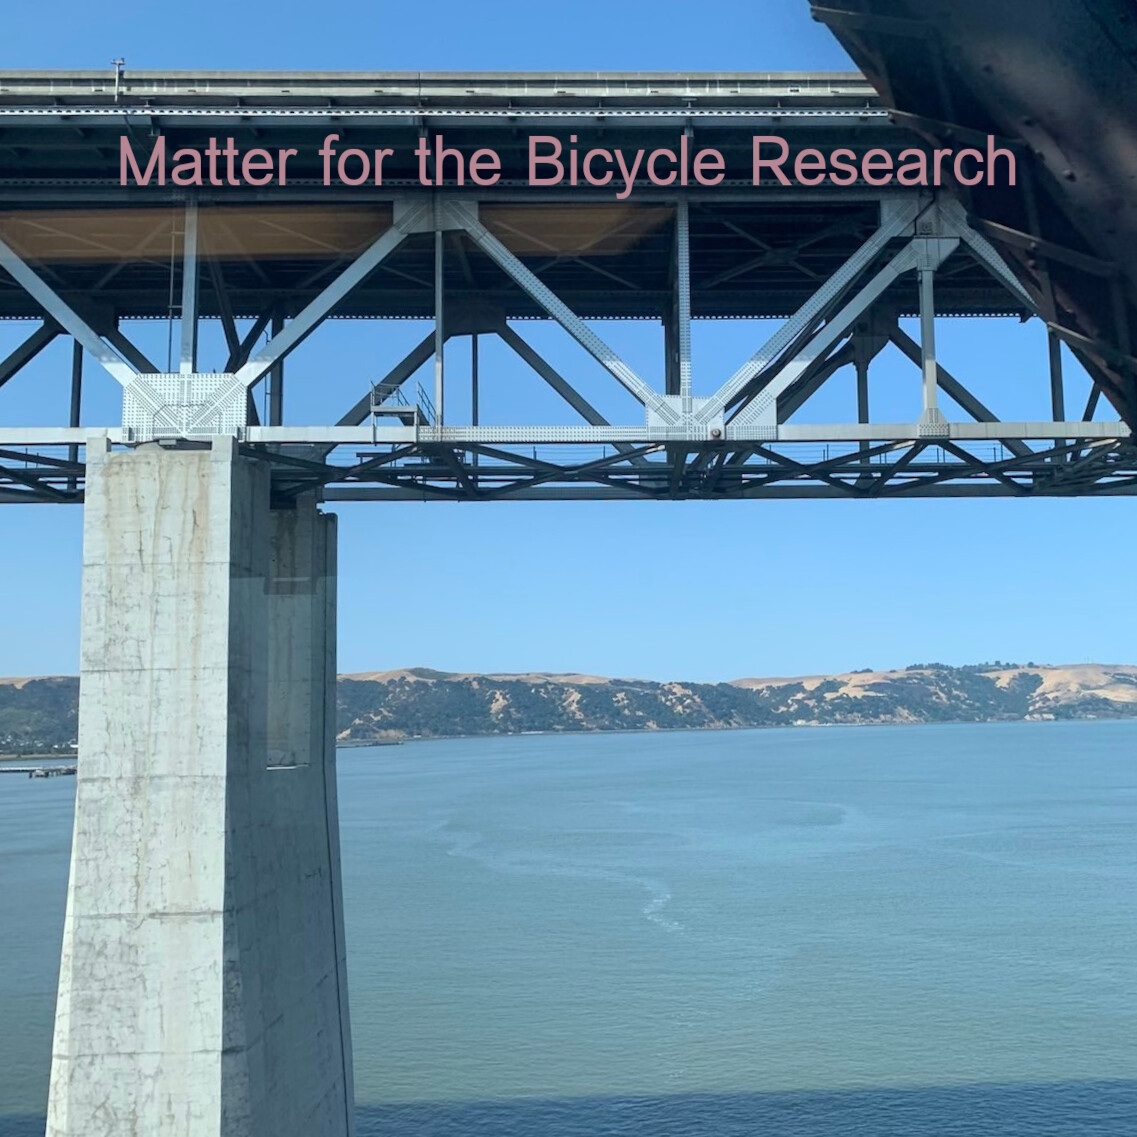 Album cover for Matter for the Bicycle Research. Underside of a bridge over a body of water.